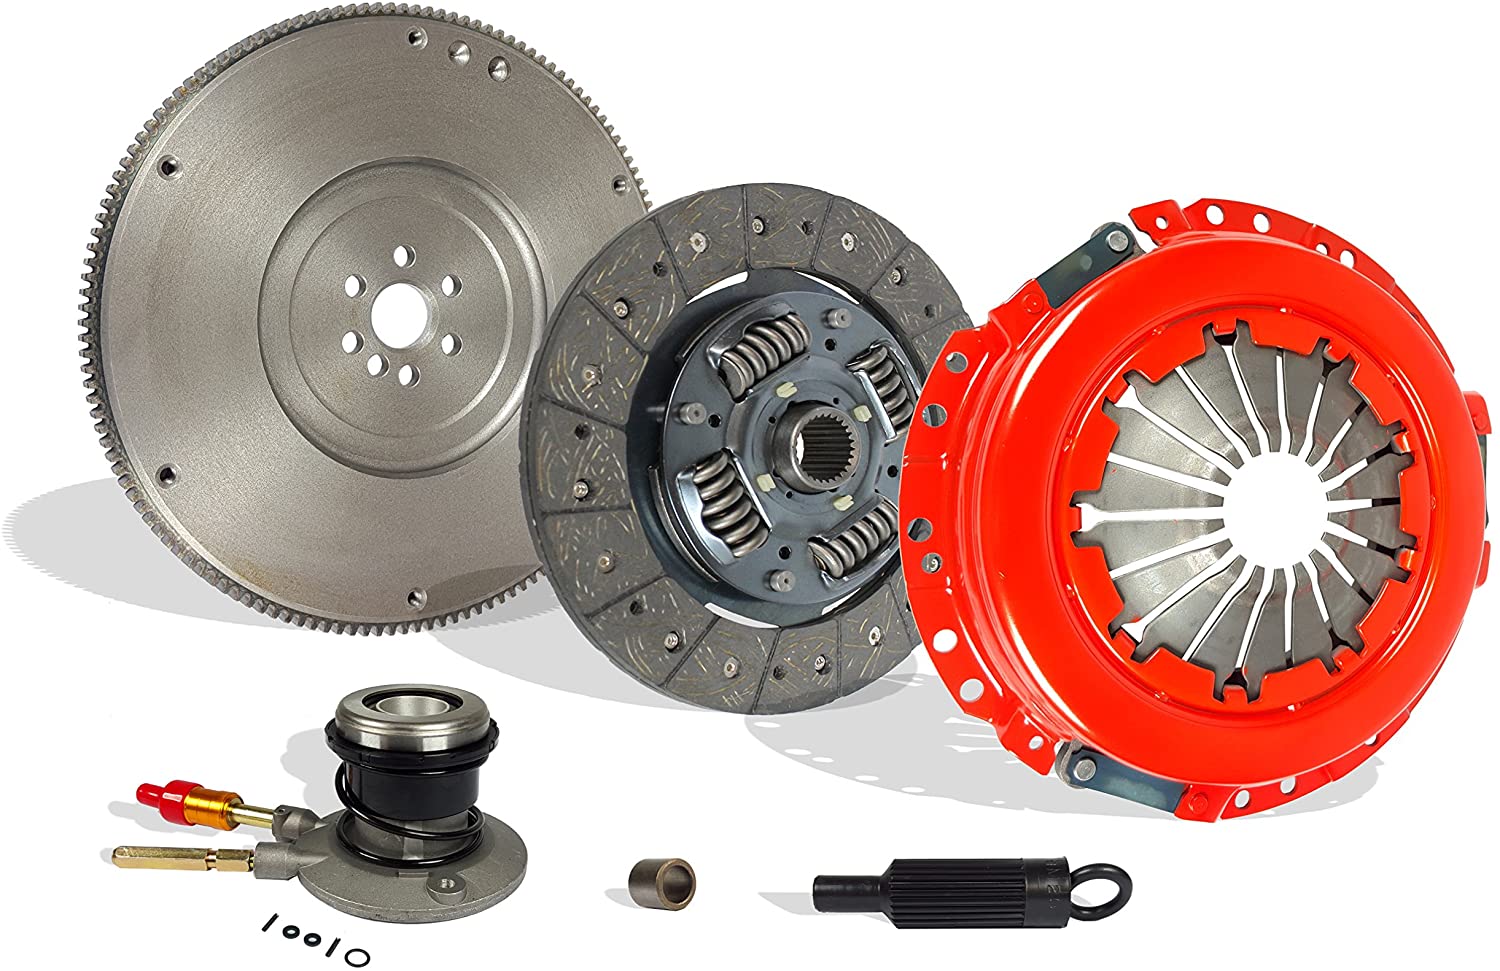 Clutch kit 04155 (STAGE 1 WITH BEARING AND FLYWHEEL)